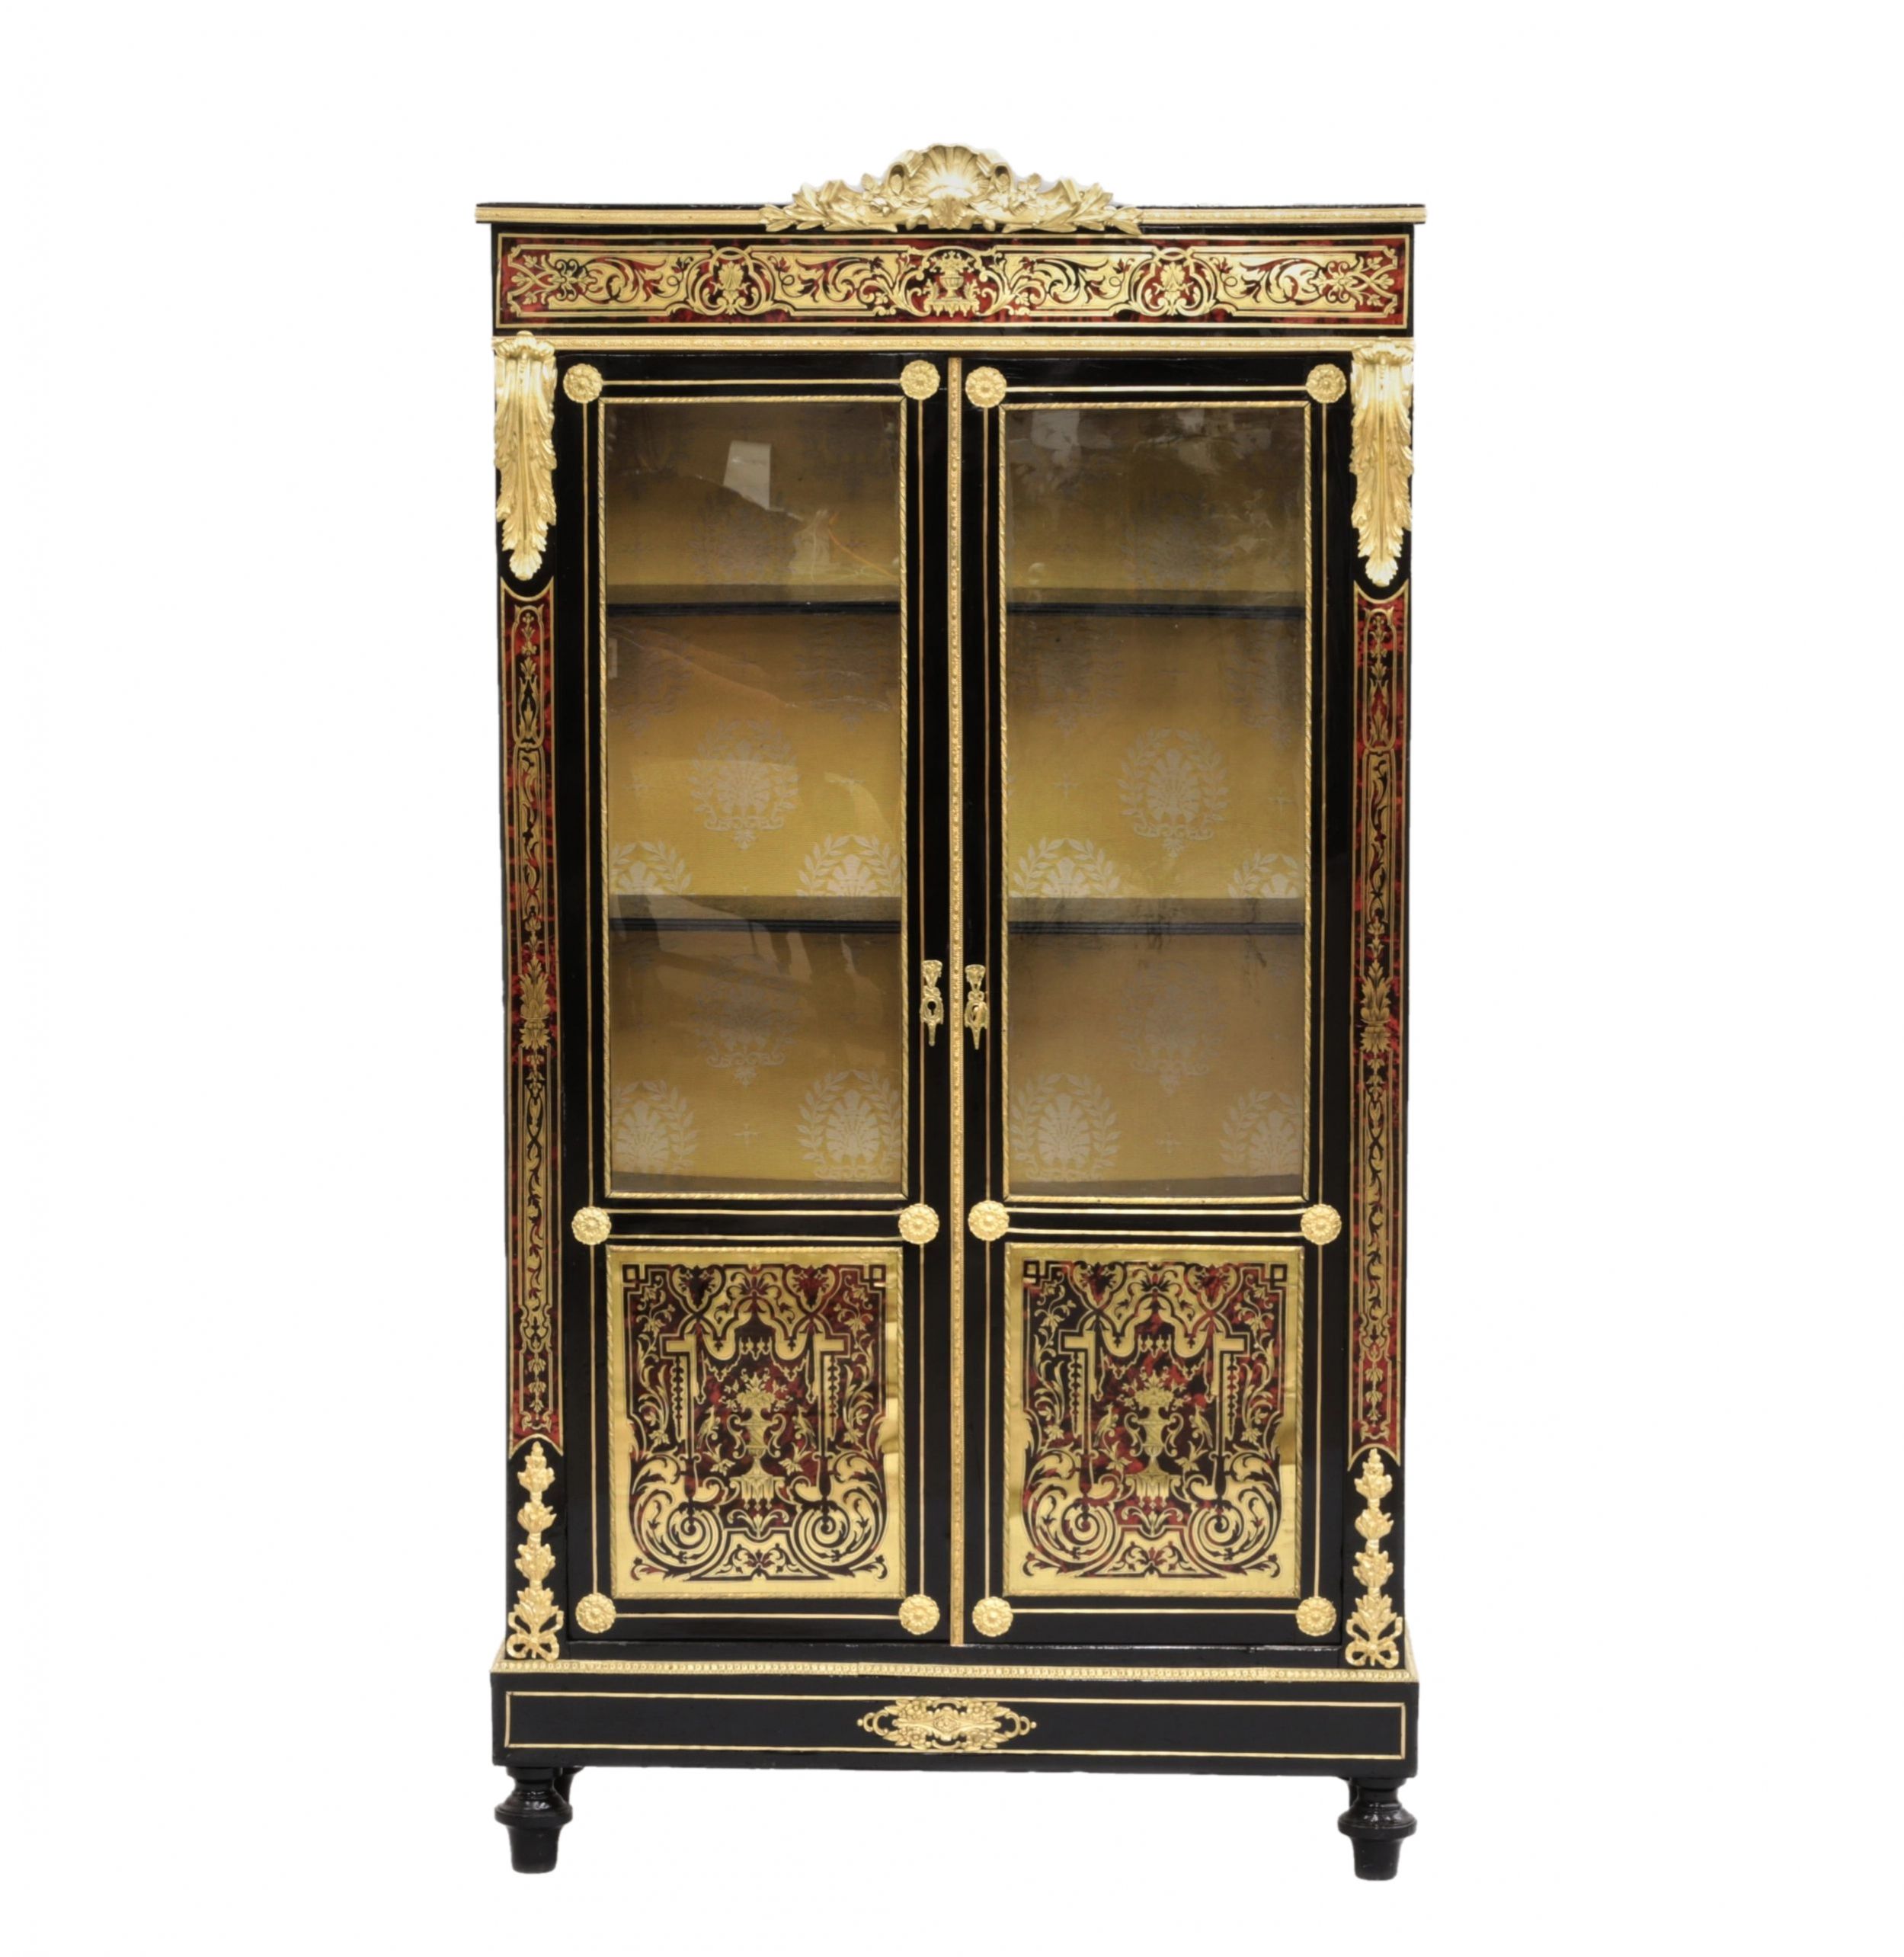 Showcase-in-Boulle-style-19th-century-